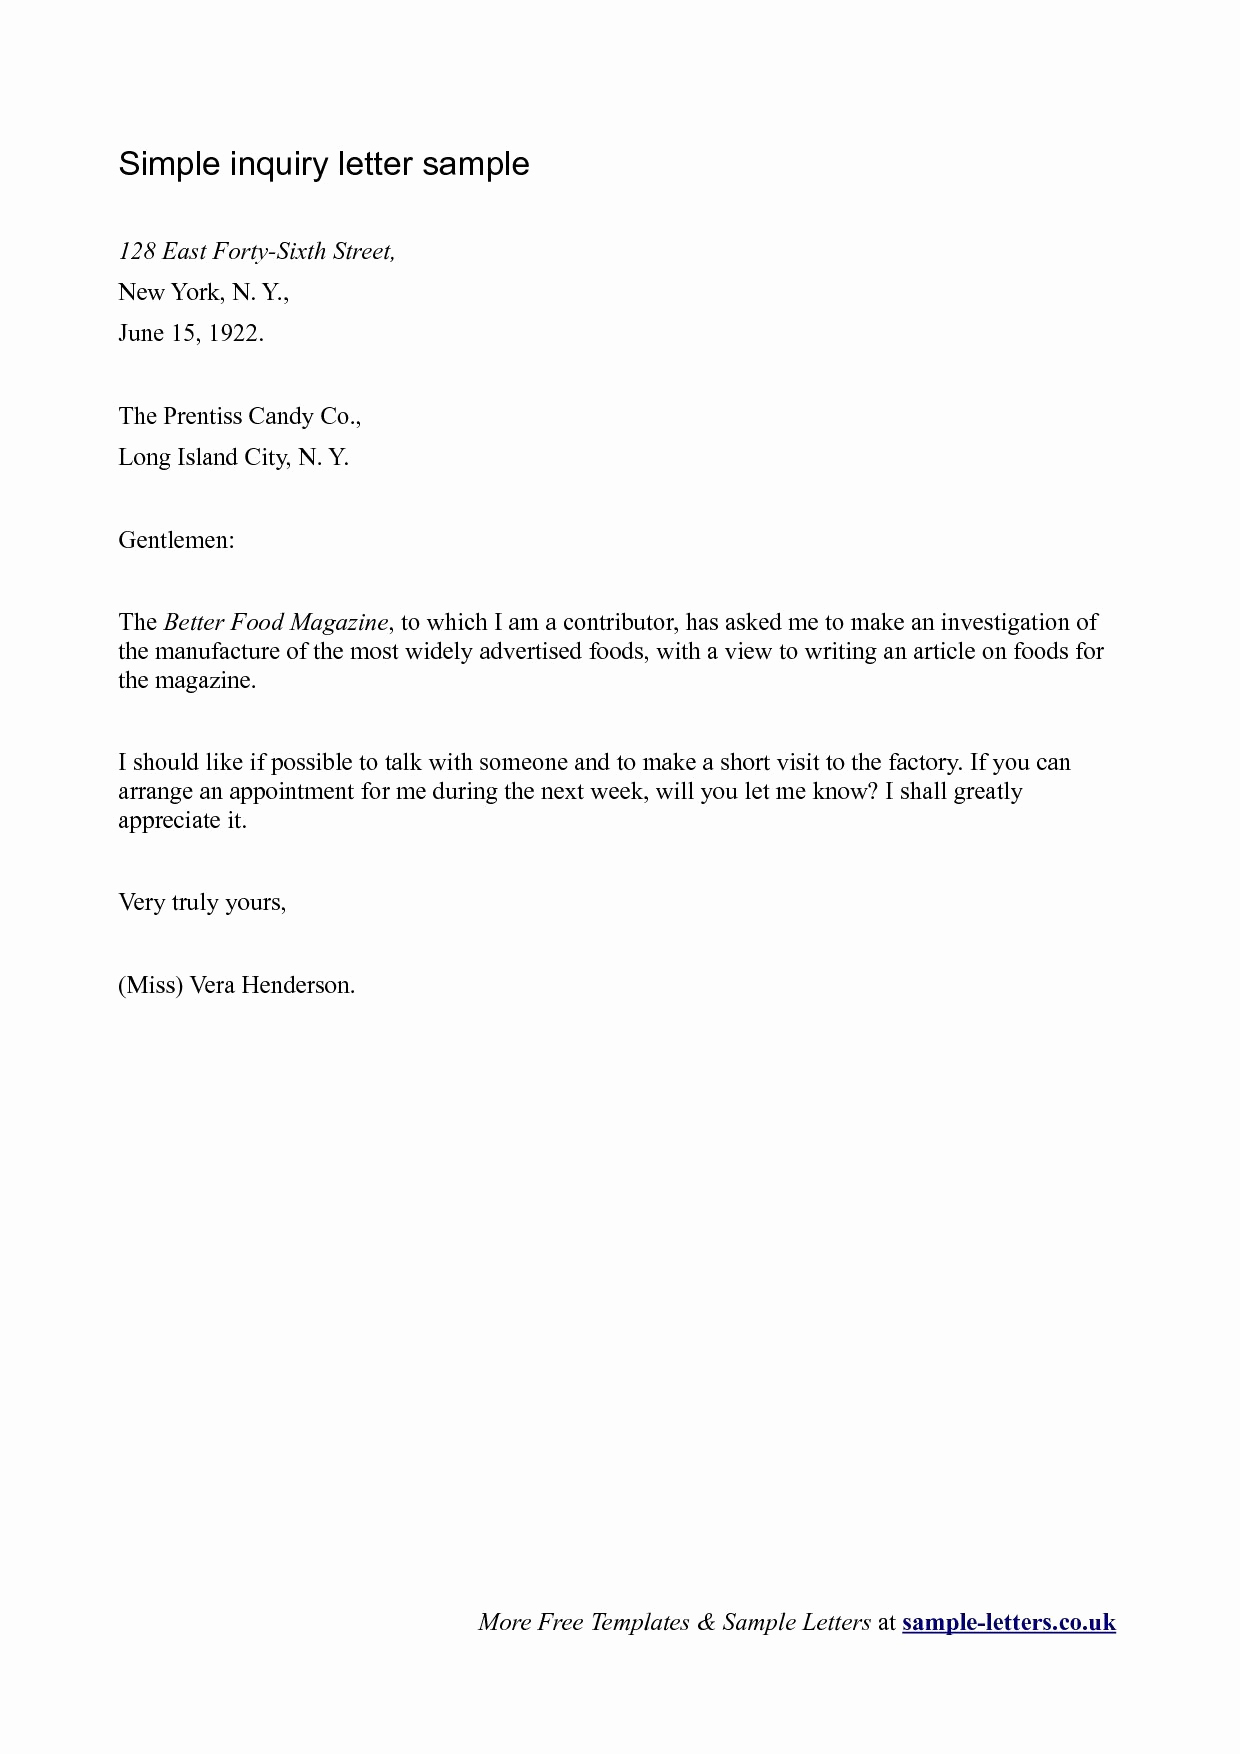 Example Of Simple Business Letter Awesome Business Letter Of Inquiry Sample the Letter Sample